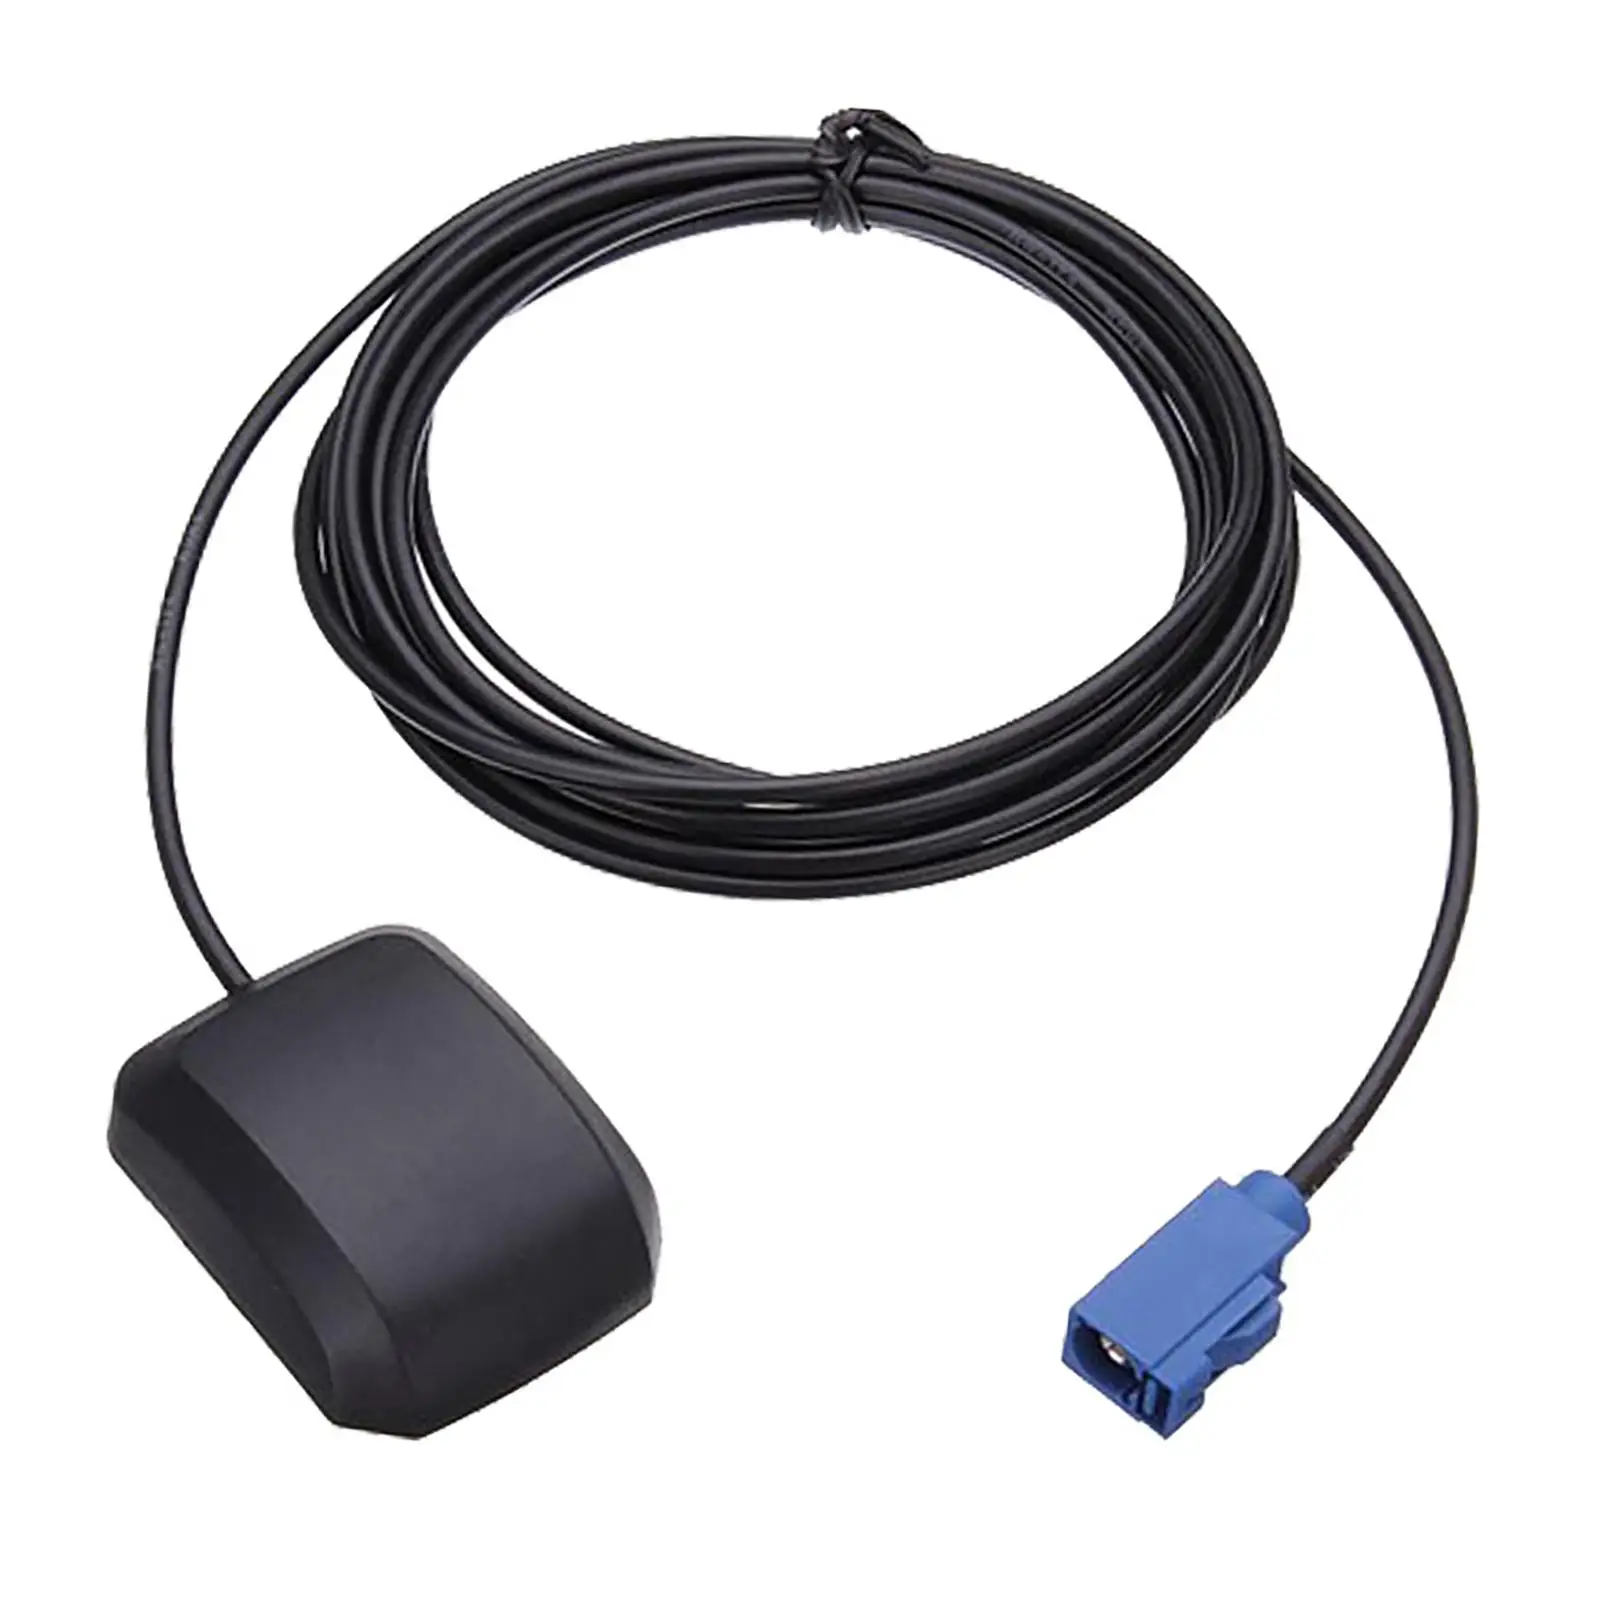 Vehicle Active Navigation with C Male Connector for Car Truck SUV Stereo 